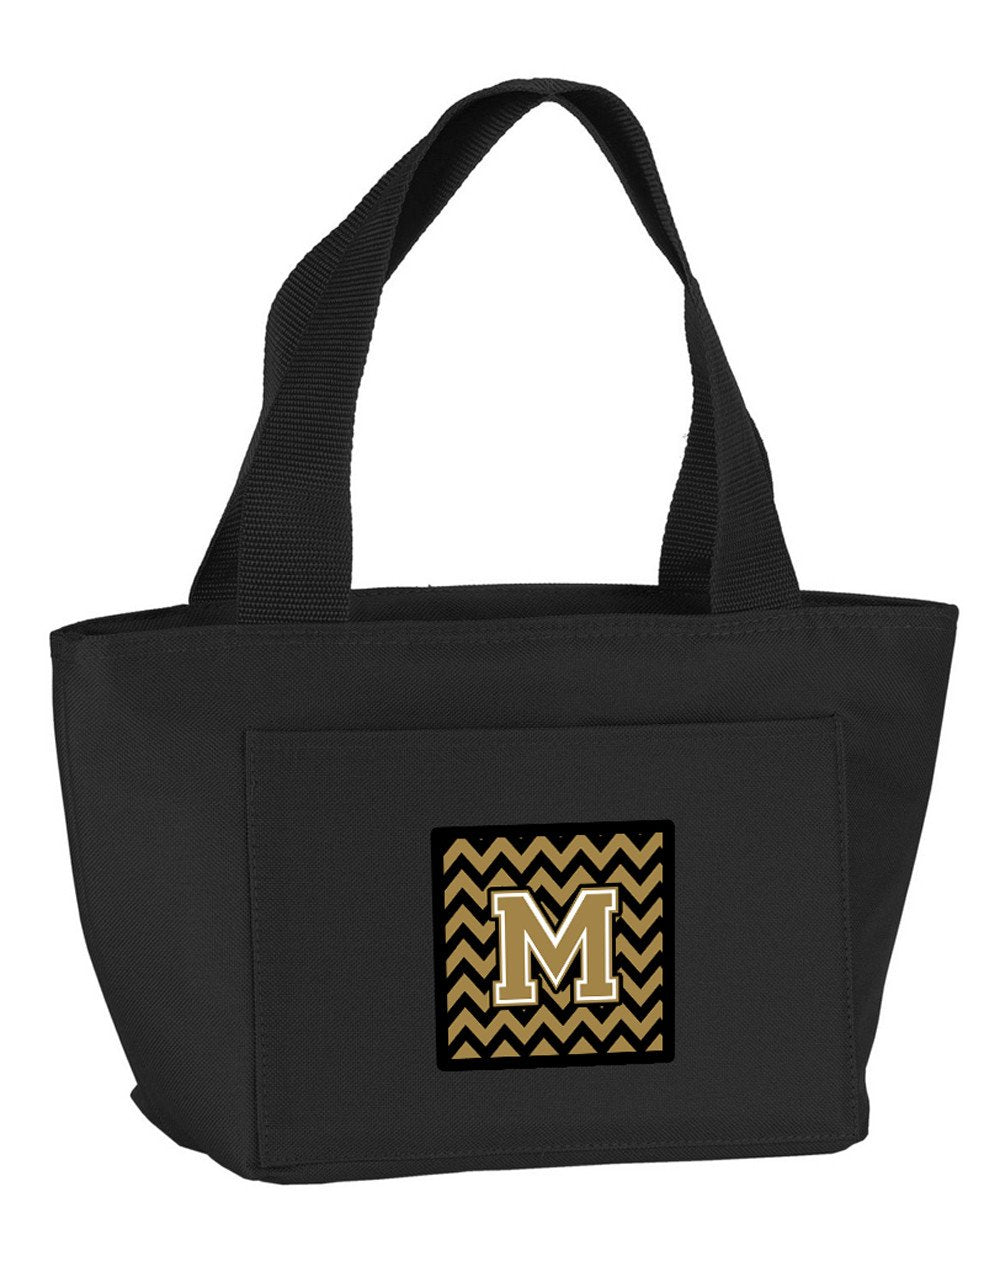 Letter M Chevron Black and Gold  Lunch Bag CJ1050-MBK-8808 by Caroline's Treasures